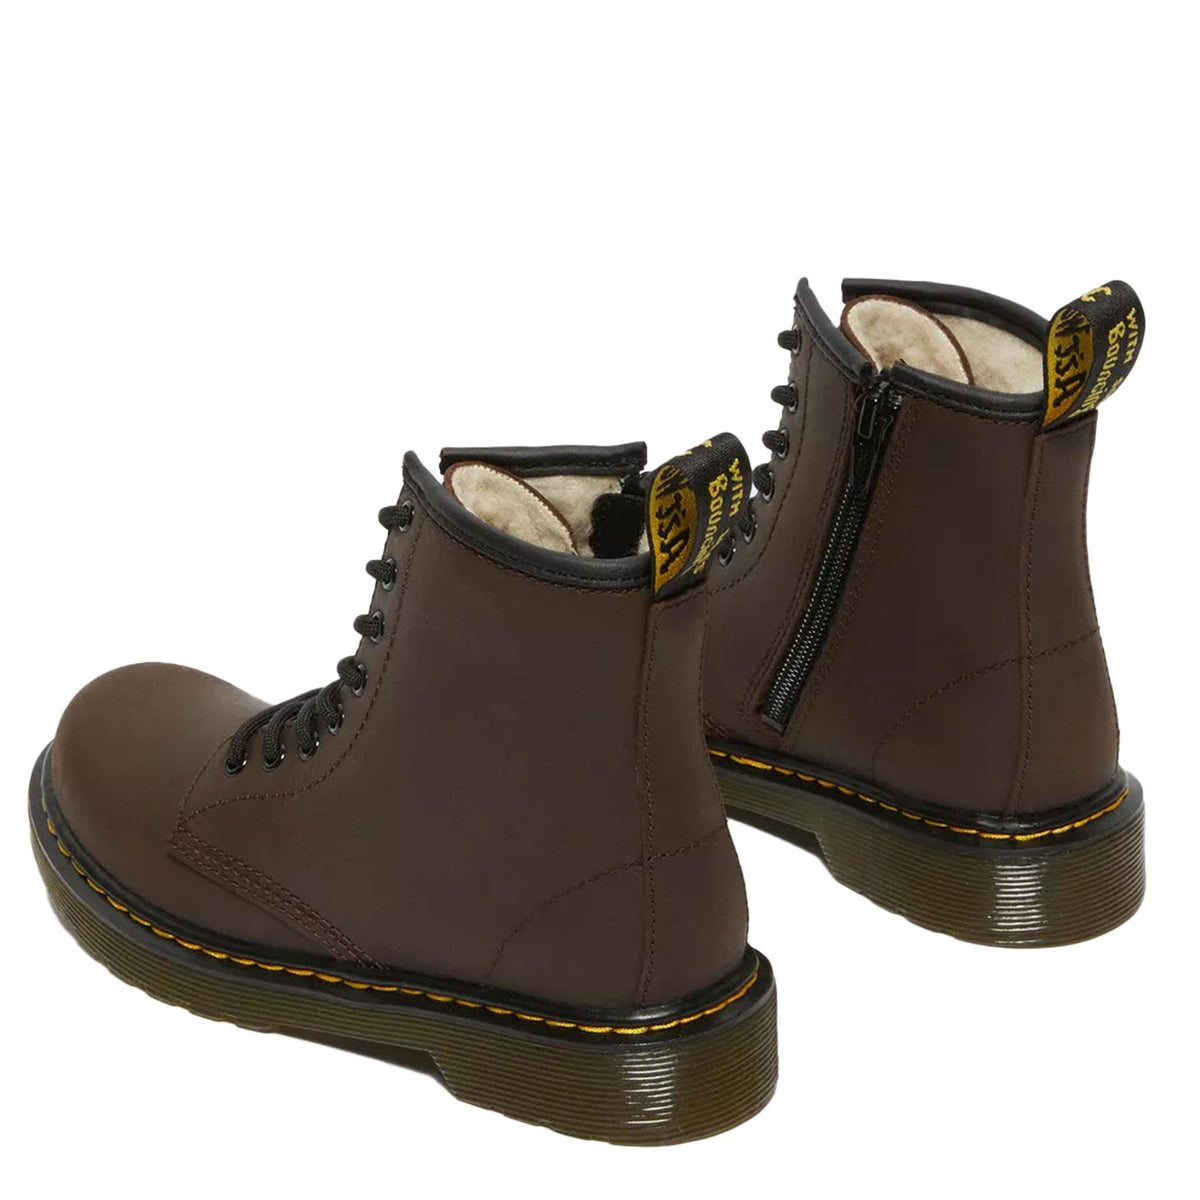 Dr Martens 1460 Junior Serena Faux Fur Lined Leather Zip Warm Boots